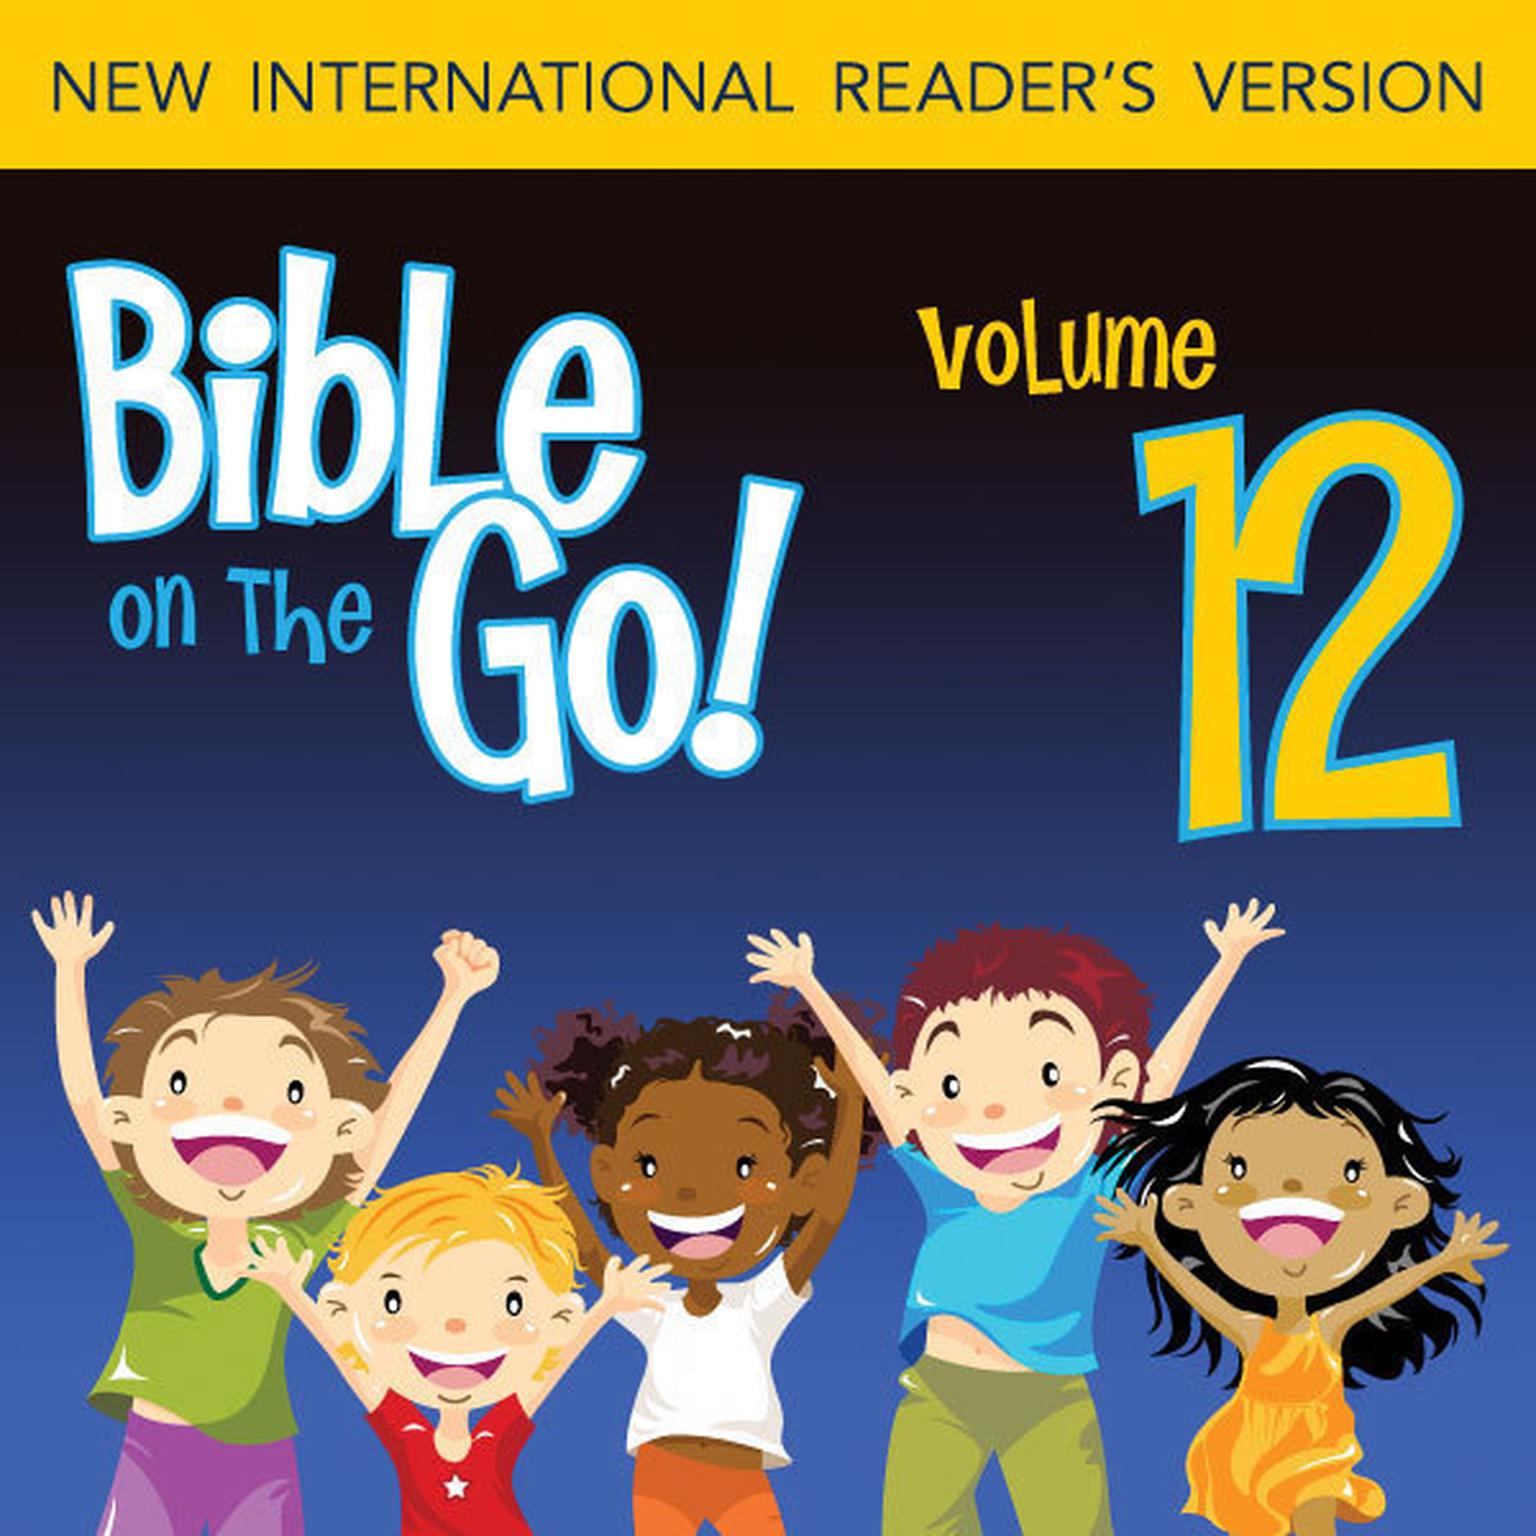 Bible on the Go Audio Bible - New International Readers Version, NIrV: Vol. 12 The Fall of Jericho, Joshuas Death, and the Story of Deborah (Joshua 5-6, 23-24; Judges 2, 4): The Fall of Jericho, Joshua’s Death, and the Story of Deborah (Joshua 5–6, 23–24; Judges 2, 4) Audiobook, by Zondervan